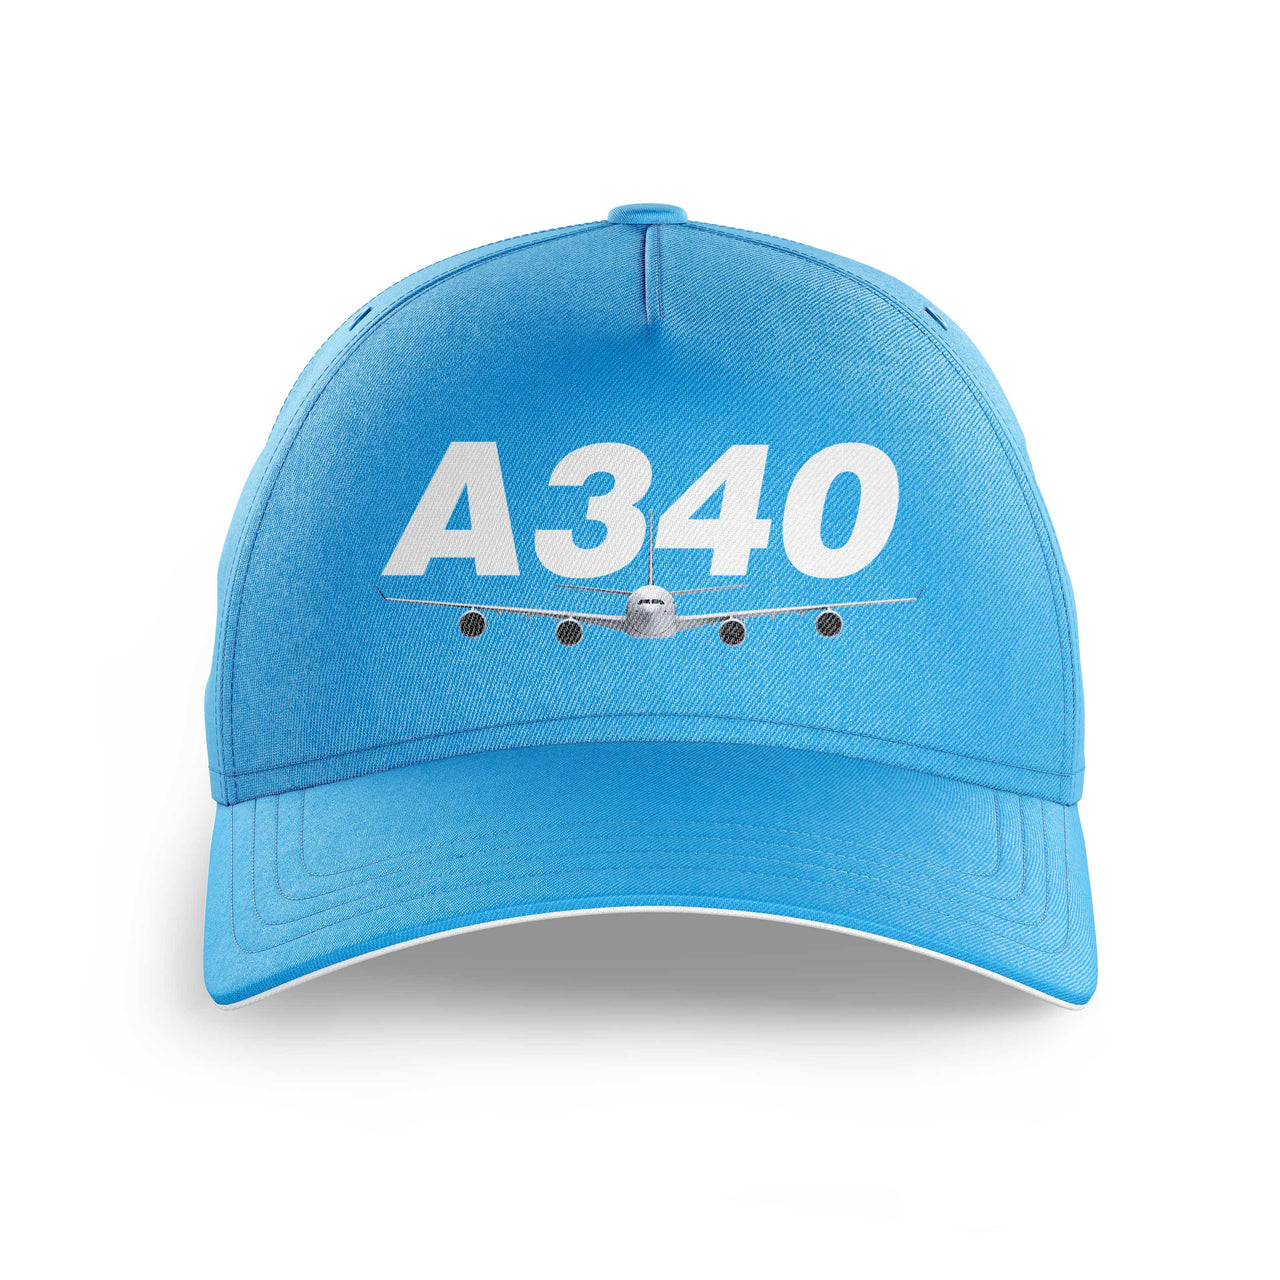 Super Airbus A340 Printed Hats